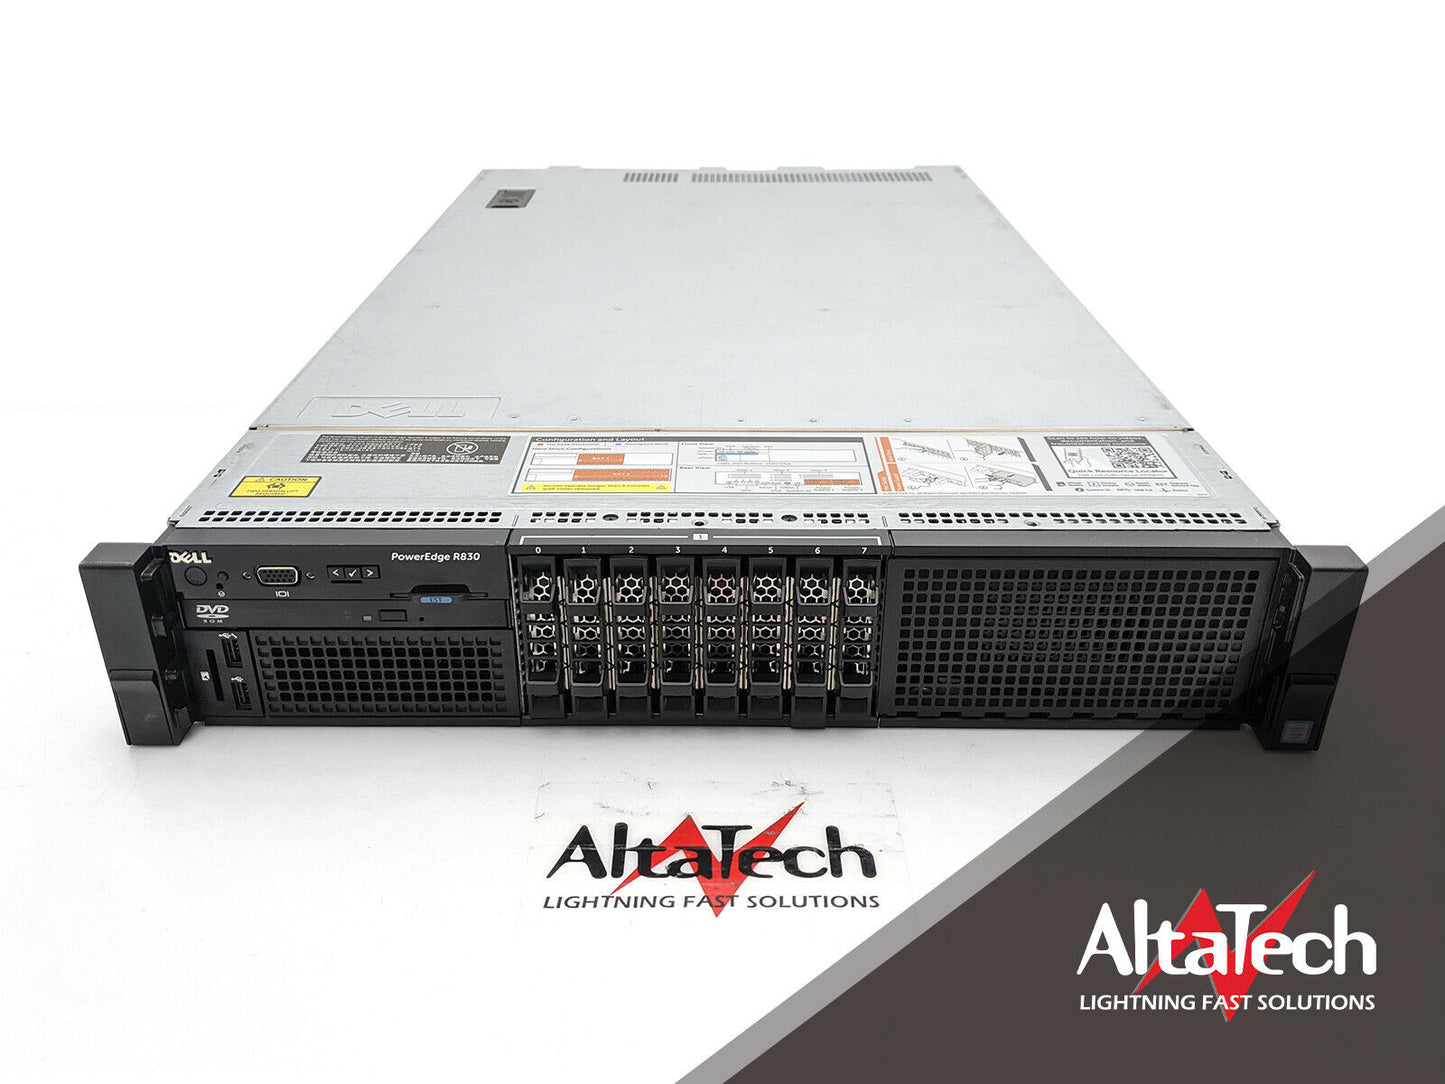 Dell R830_4x2.5GHz_8core_384gb_0x0GB PowerEdge R830 8 BAY 4X E5-4655V4 2.5GHZ 384GB Memory NO HDD H730, Used